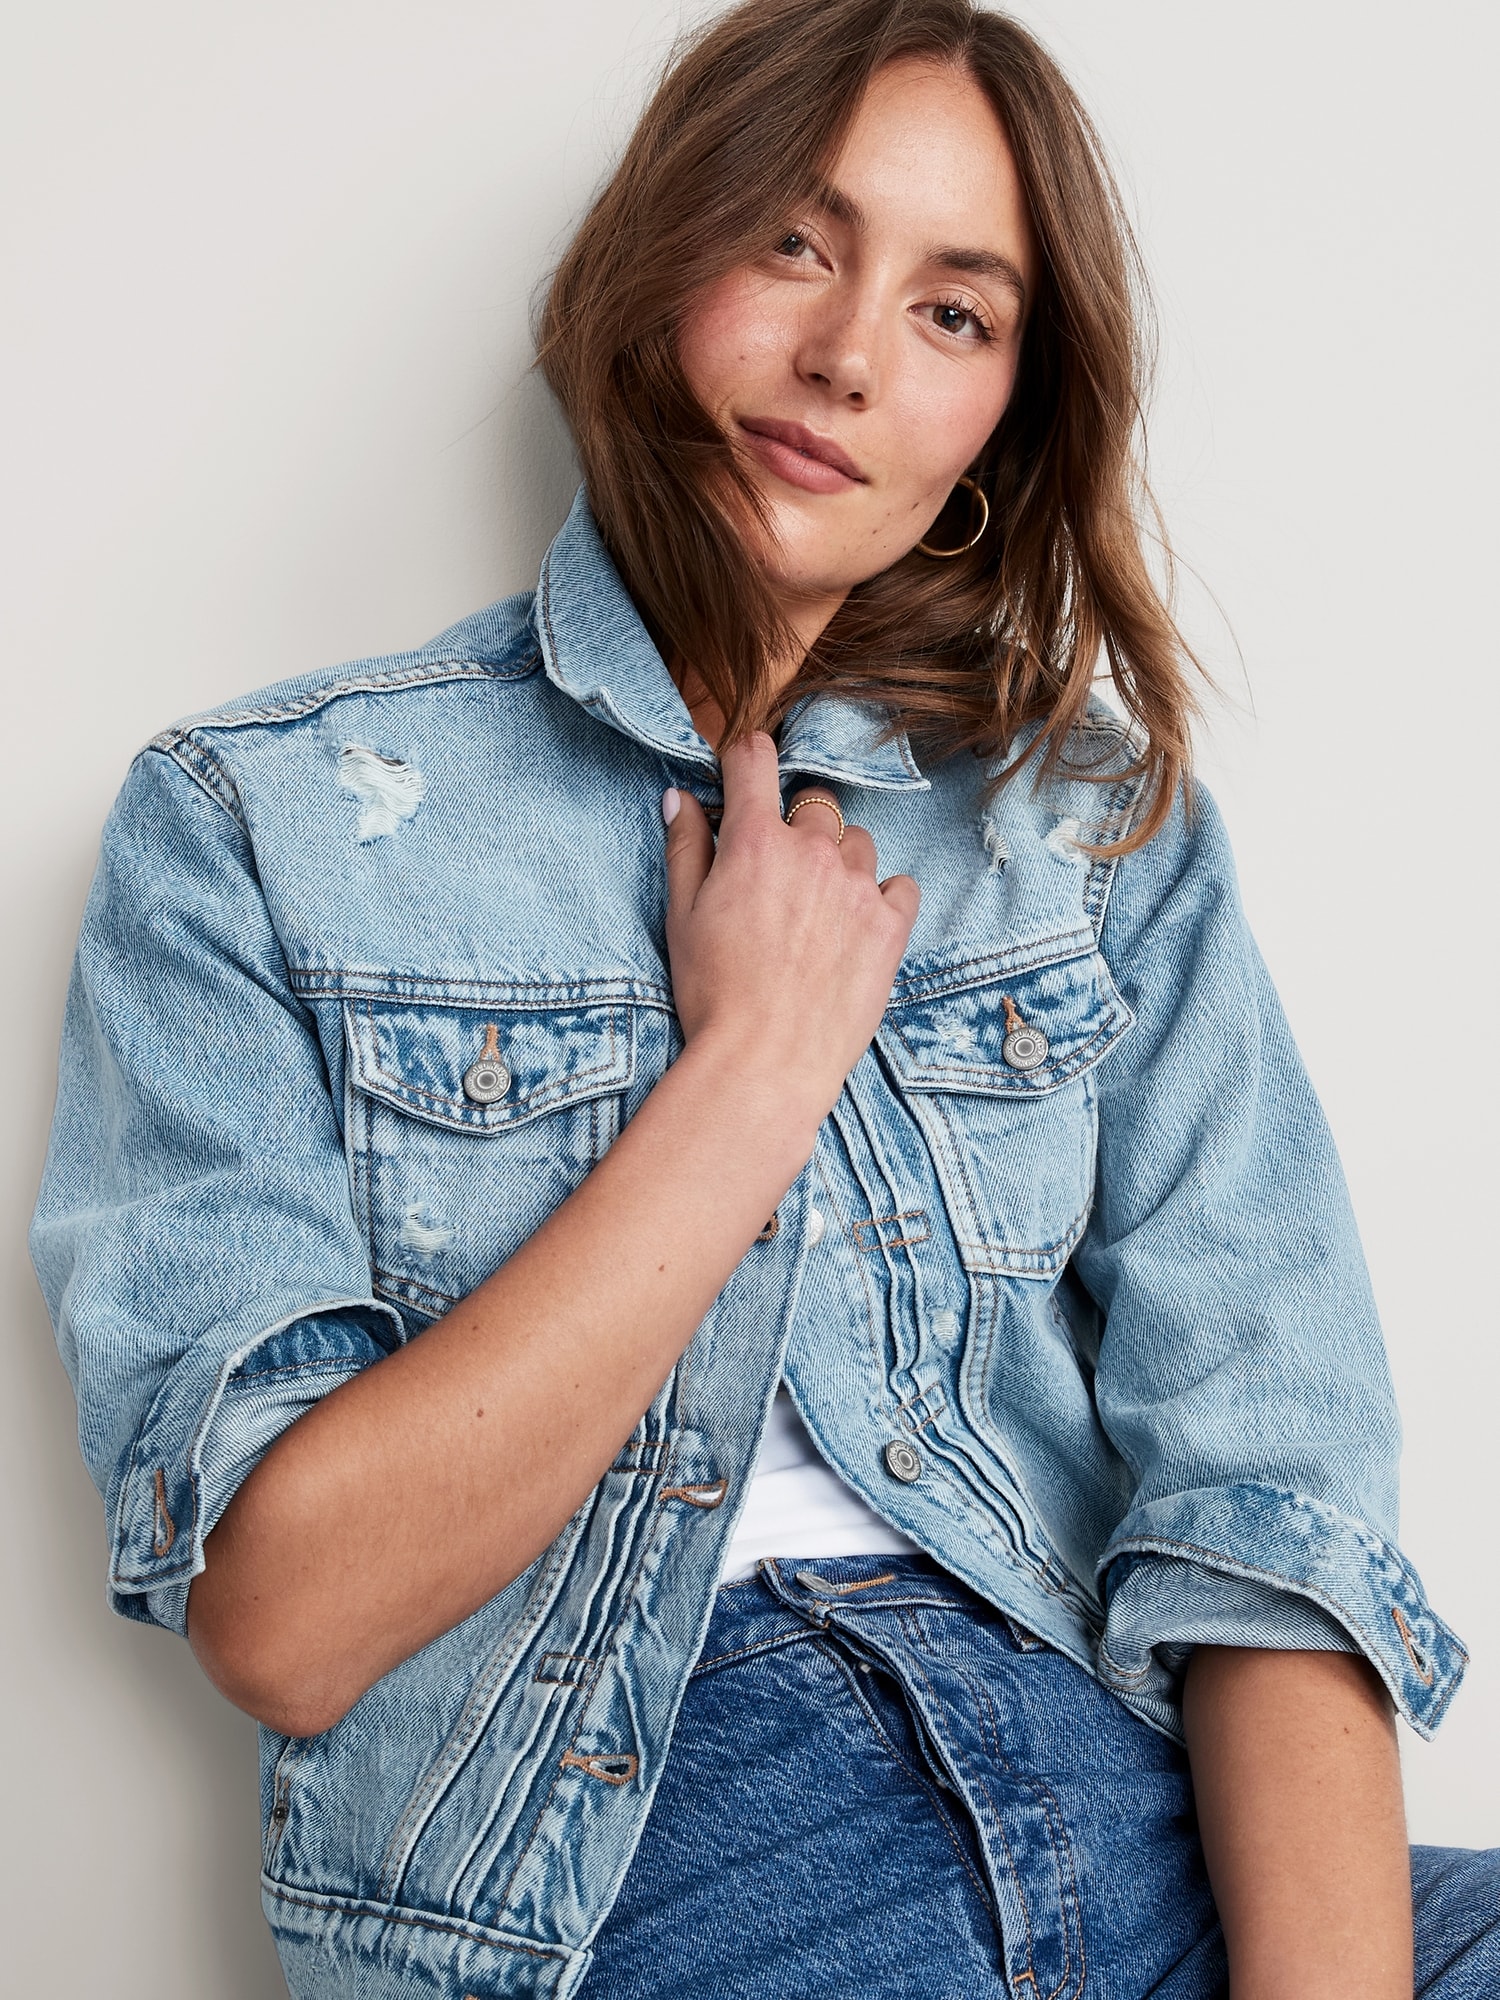 Long Sleeve T-shirt with Denim Jacket Outfits For Women (21 ideas